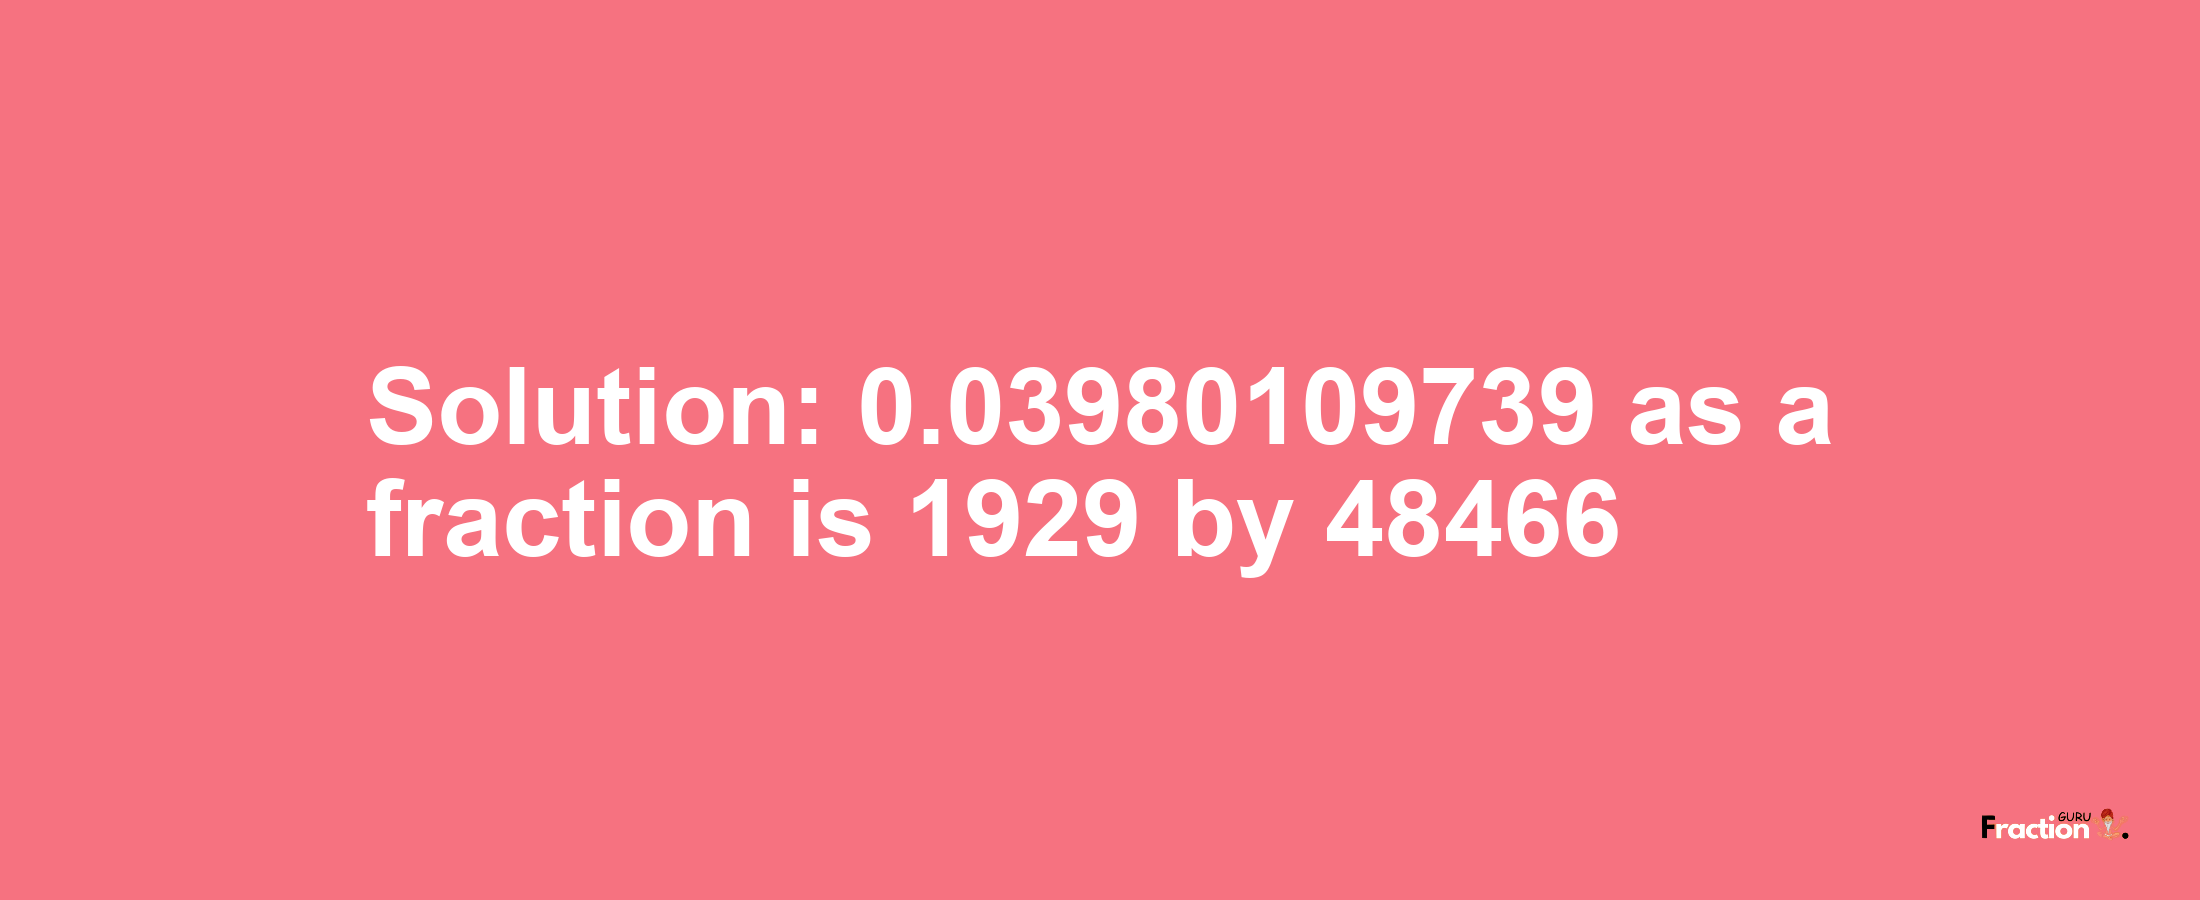 Solution:0.03980109739 as a fraction is 1929/48466